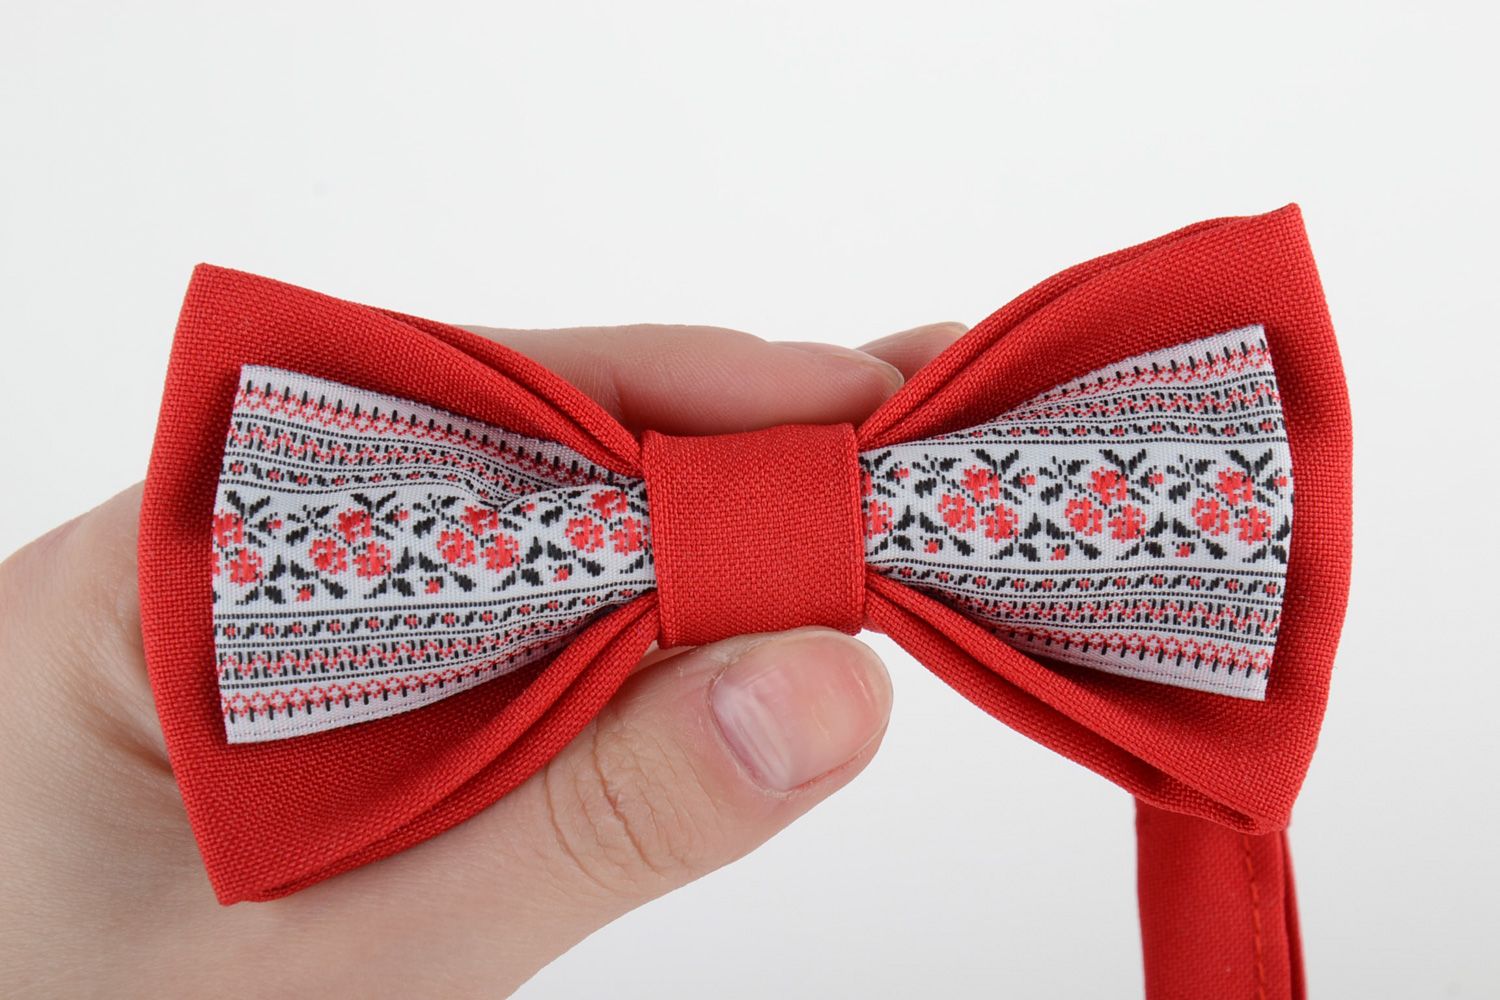 Handmade designer bow tie sewn of red and patterned fabrics in ethnic style photo 5